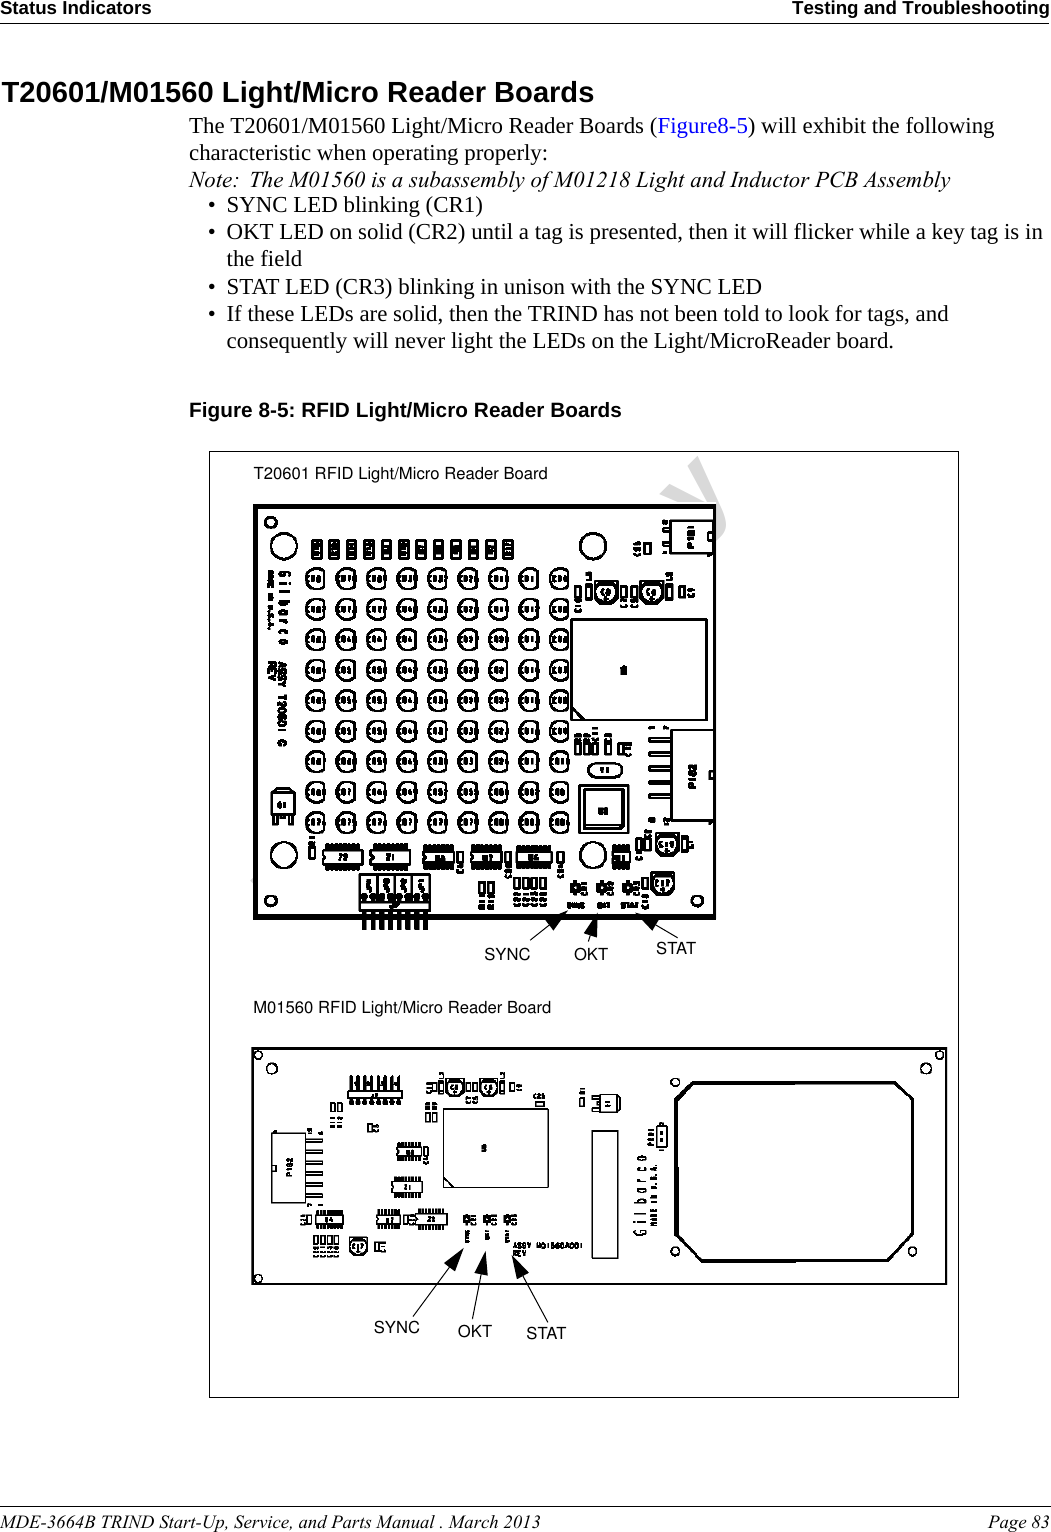 MDE-3664B TRIND Start-Up, Service, and Parts Manual . March 2013 Page 83Status Indicators Testing and TroubleshootingPreliminaryT20601/M01560 Light/Micro Reader BoardsThe T20601/M01560 Light/Micro Reader Boards (Figure8-5) will exhibit the following characteristic when operating properly:Note: The M01560 is a subassembly of M01218 Light and Inductor PCB Assembly• SYNC LED blinking (CR1)•OKT LED on solid (CR2) until a tag is presented, then it will flicker while a key tag is in the field•STAT LED (CR3) blinking in unison with the SYNC LED• If these LEDs are solid, then the TRIND has not been told to look for tags, and consequently will never light the LEDs on the Light/MicroReader board. Figure 8-5: RFID Light/Micro Reader Boards SYNC OKT STATM01560 RFID Light/Micro Reader BoardSYNC OKT STATT20601 RFID Light/Micro Reader Board